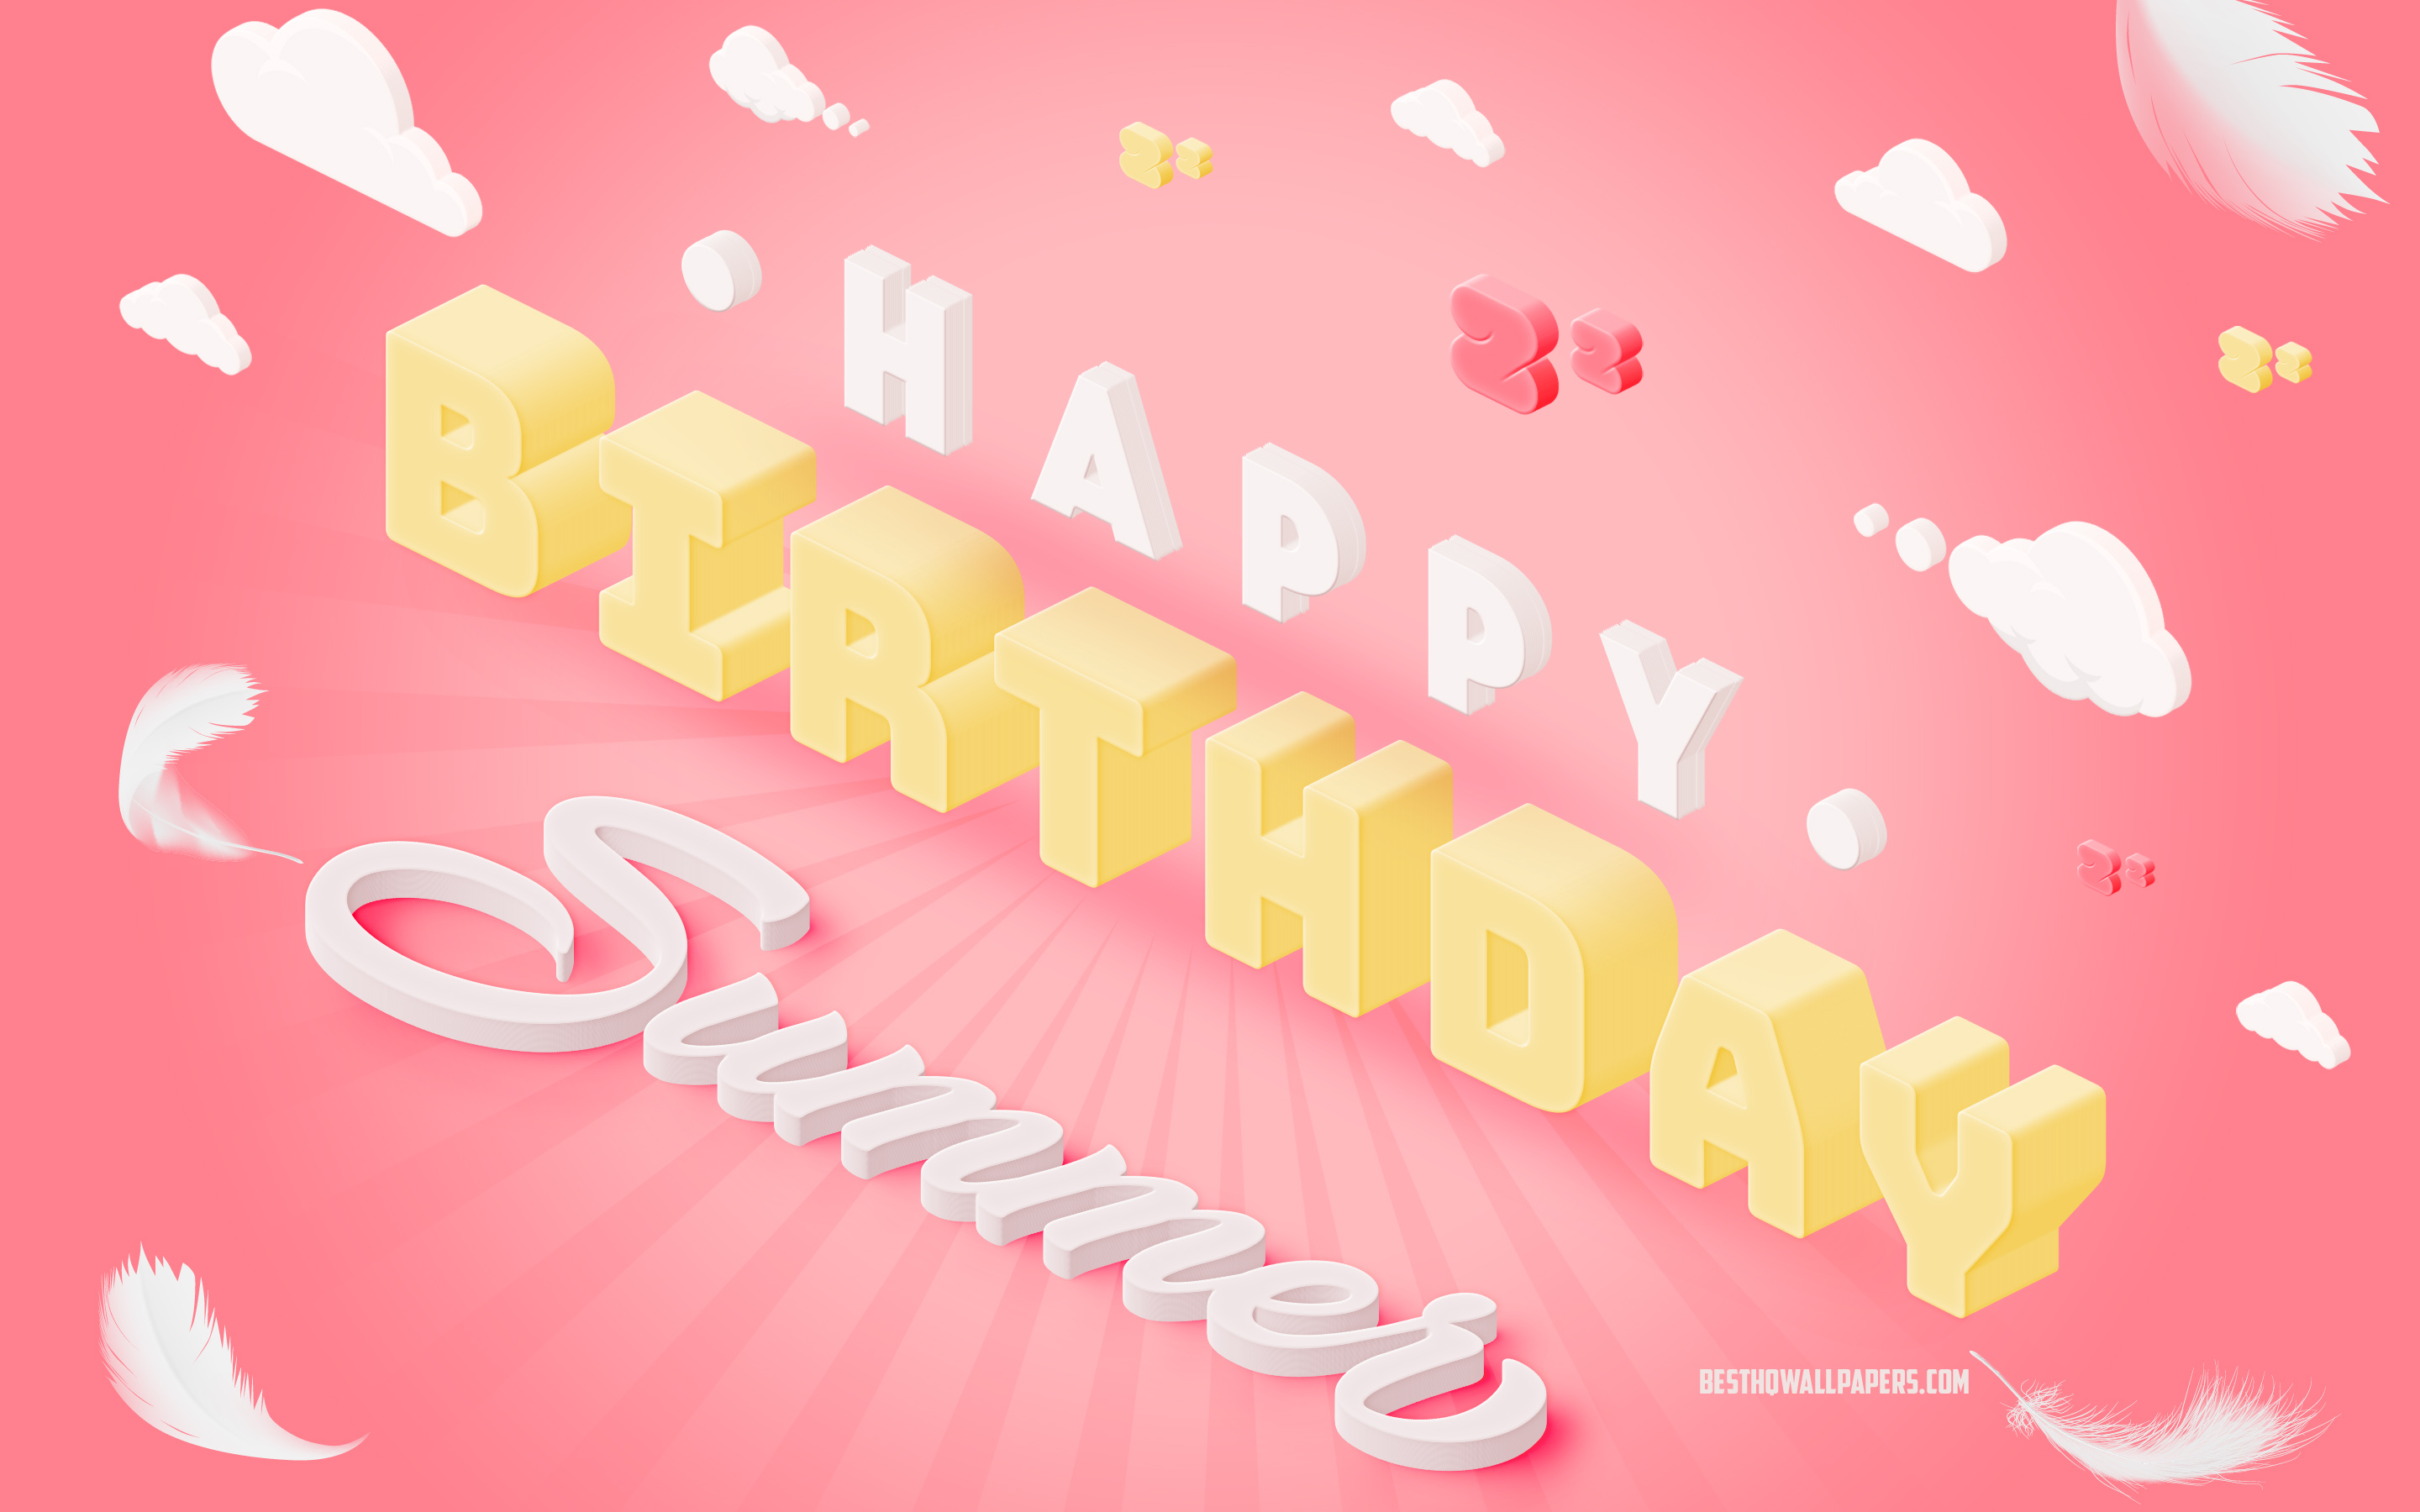 Download wallpaper Happy Birthday Summer, 3D Art, Birthday 3D Background, Summer, Pink Background, Happy Summer birthday, 3D Letters, Summer Birthday, Creative Birthday Background for desktop with resolution 2880x1800. High Quality HD picture